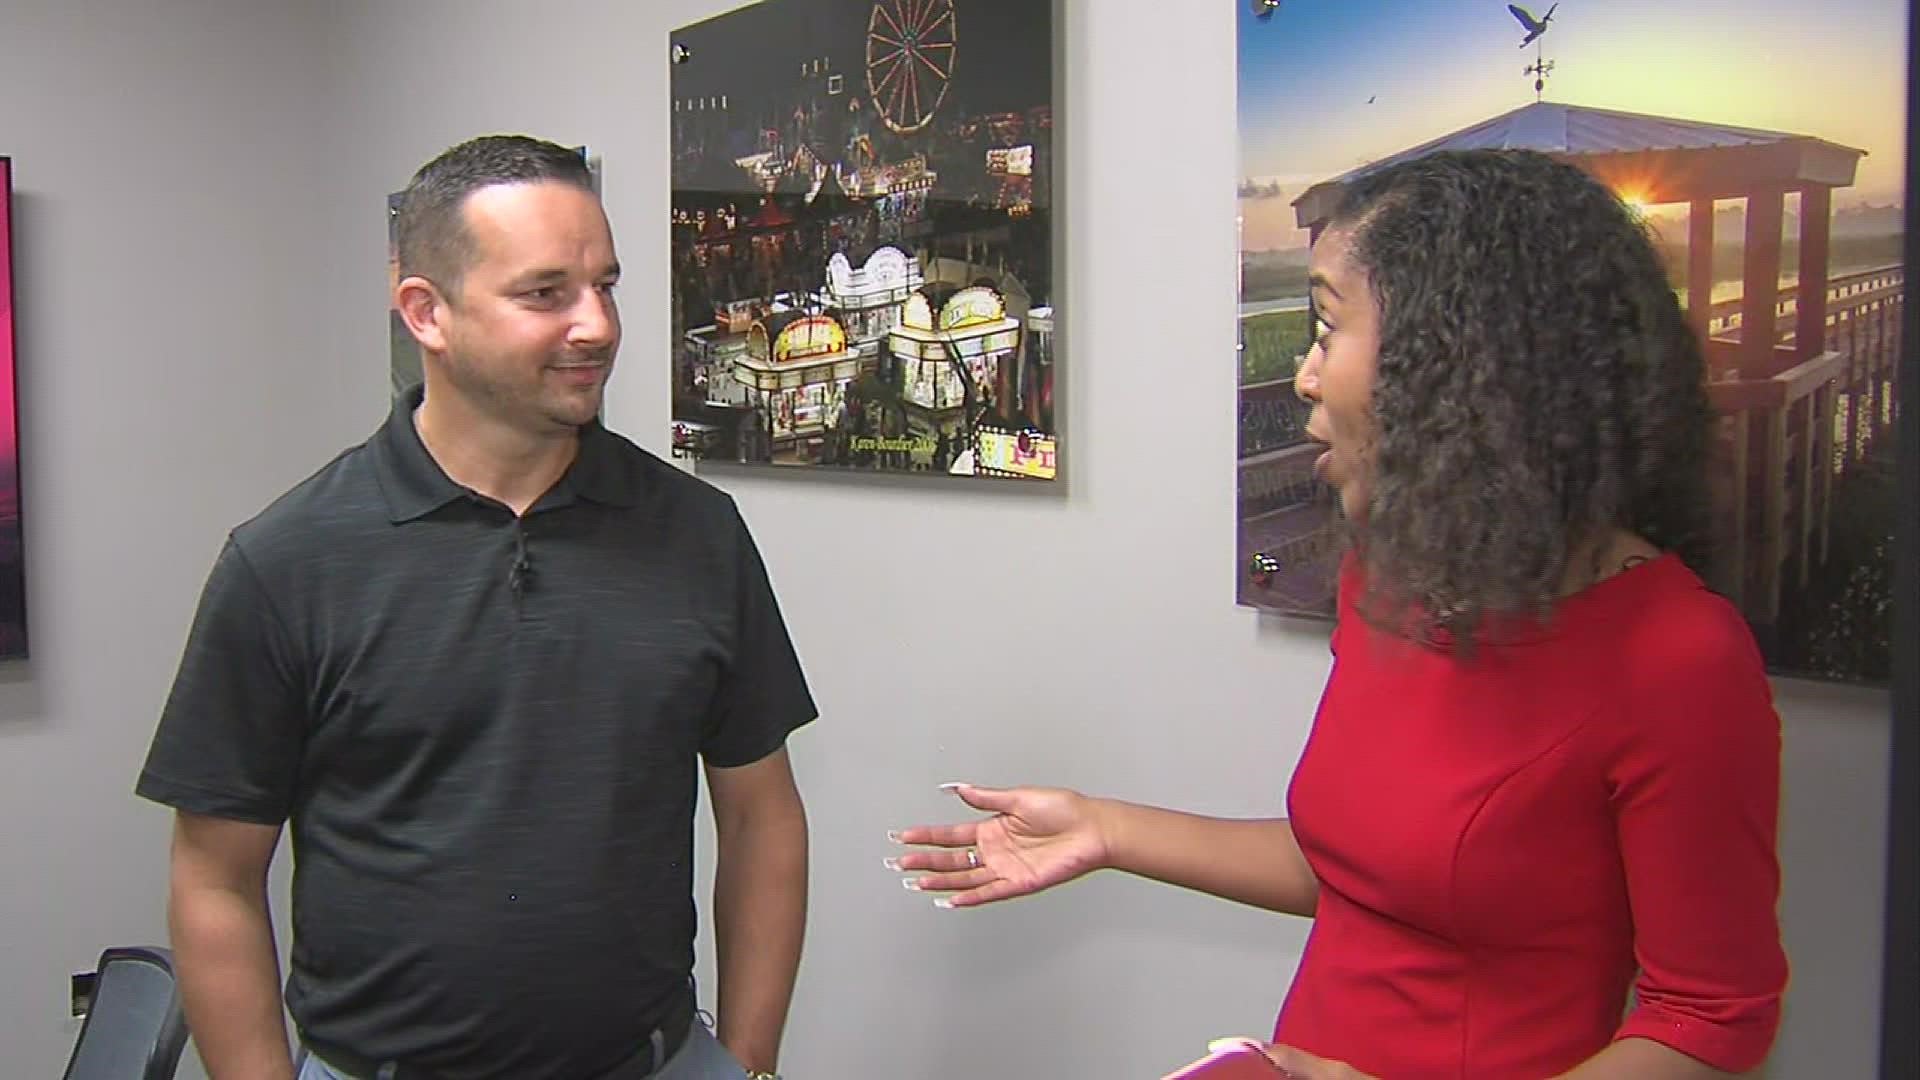 Southeast Texas business owners have been hit hard during the pandemic but Lamar's Small Business Development Center has been able to help out.